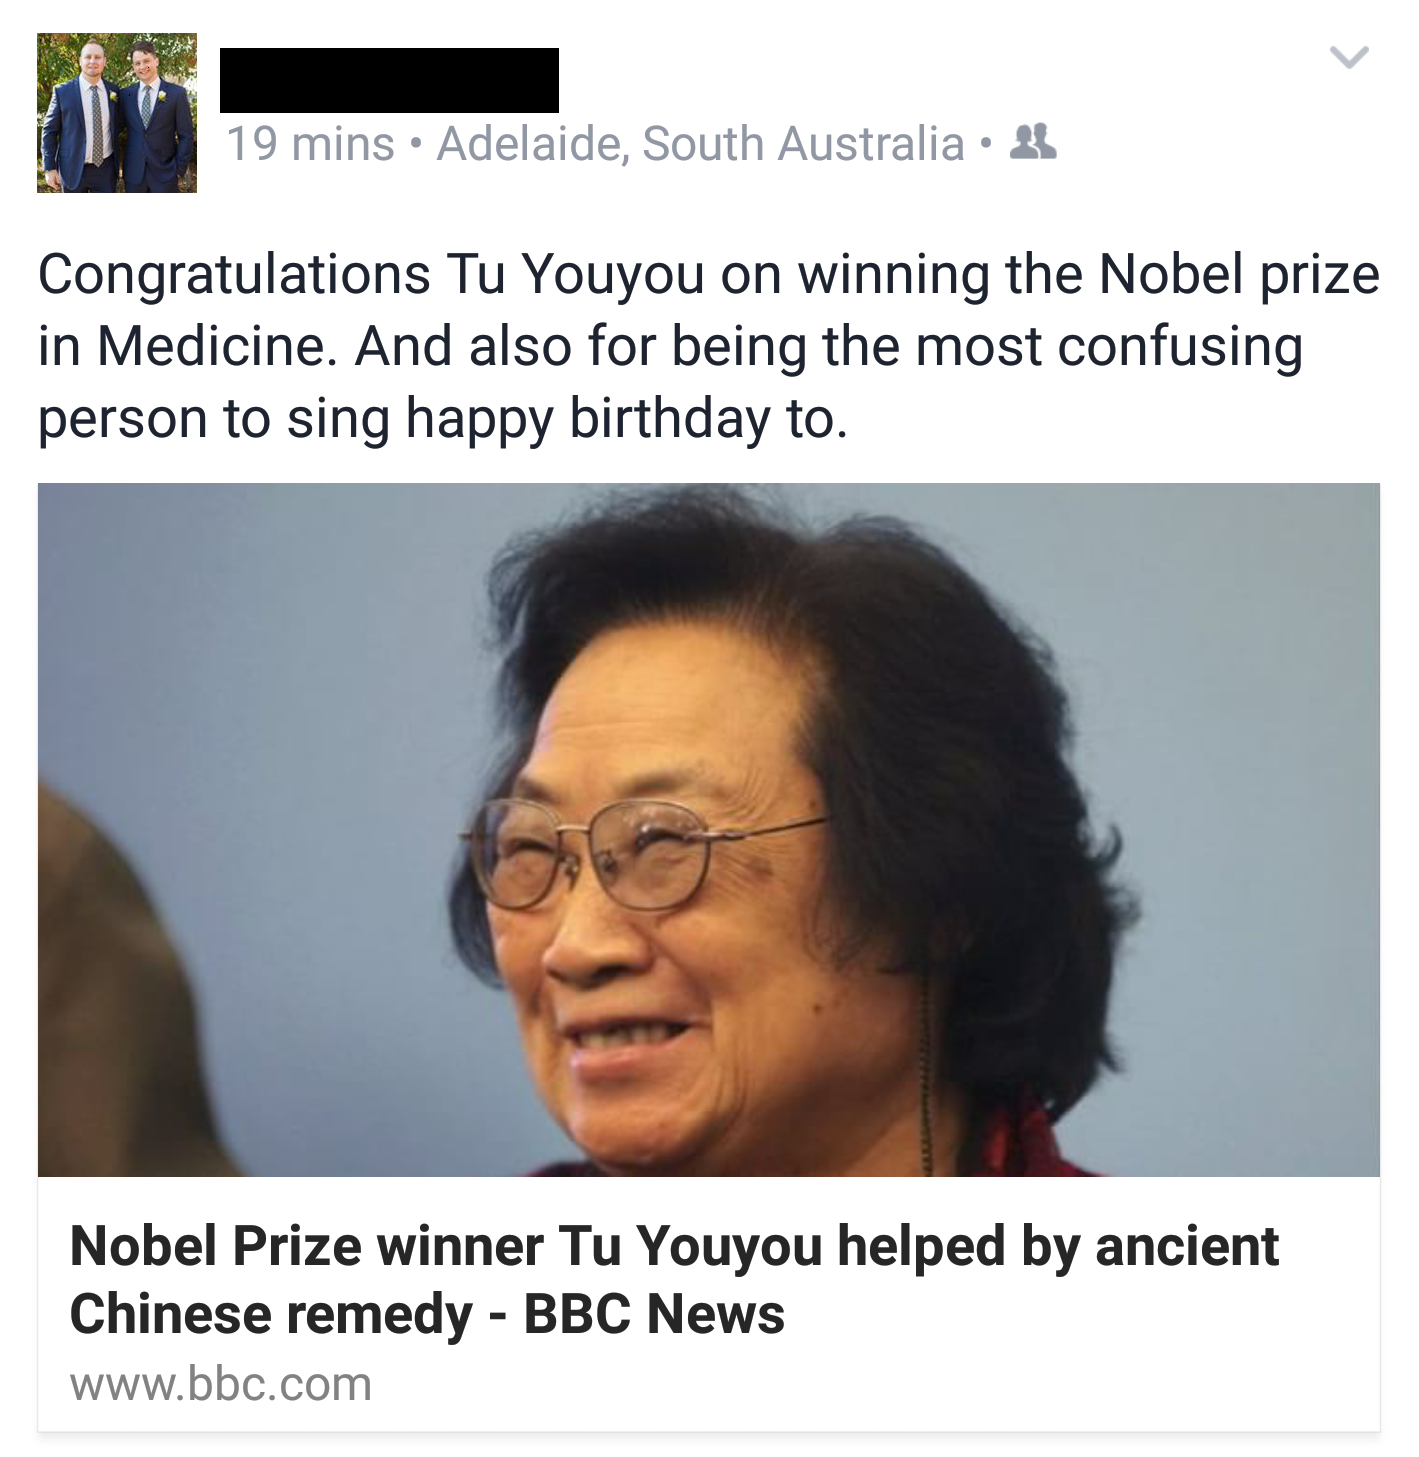 tu youyou happy birthday - 19 mins. Adelaide, South Australia. 2 Congratulations Tu Youyou on winning the Nobel Prize in Medicine. And also for being the most confusing person to sing happy birthday to. Nobel Prize winner Tu Youyou helped by ancient Chine